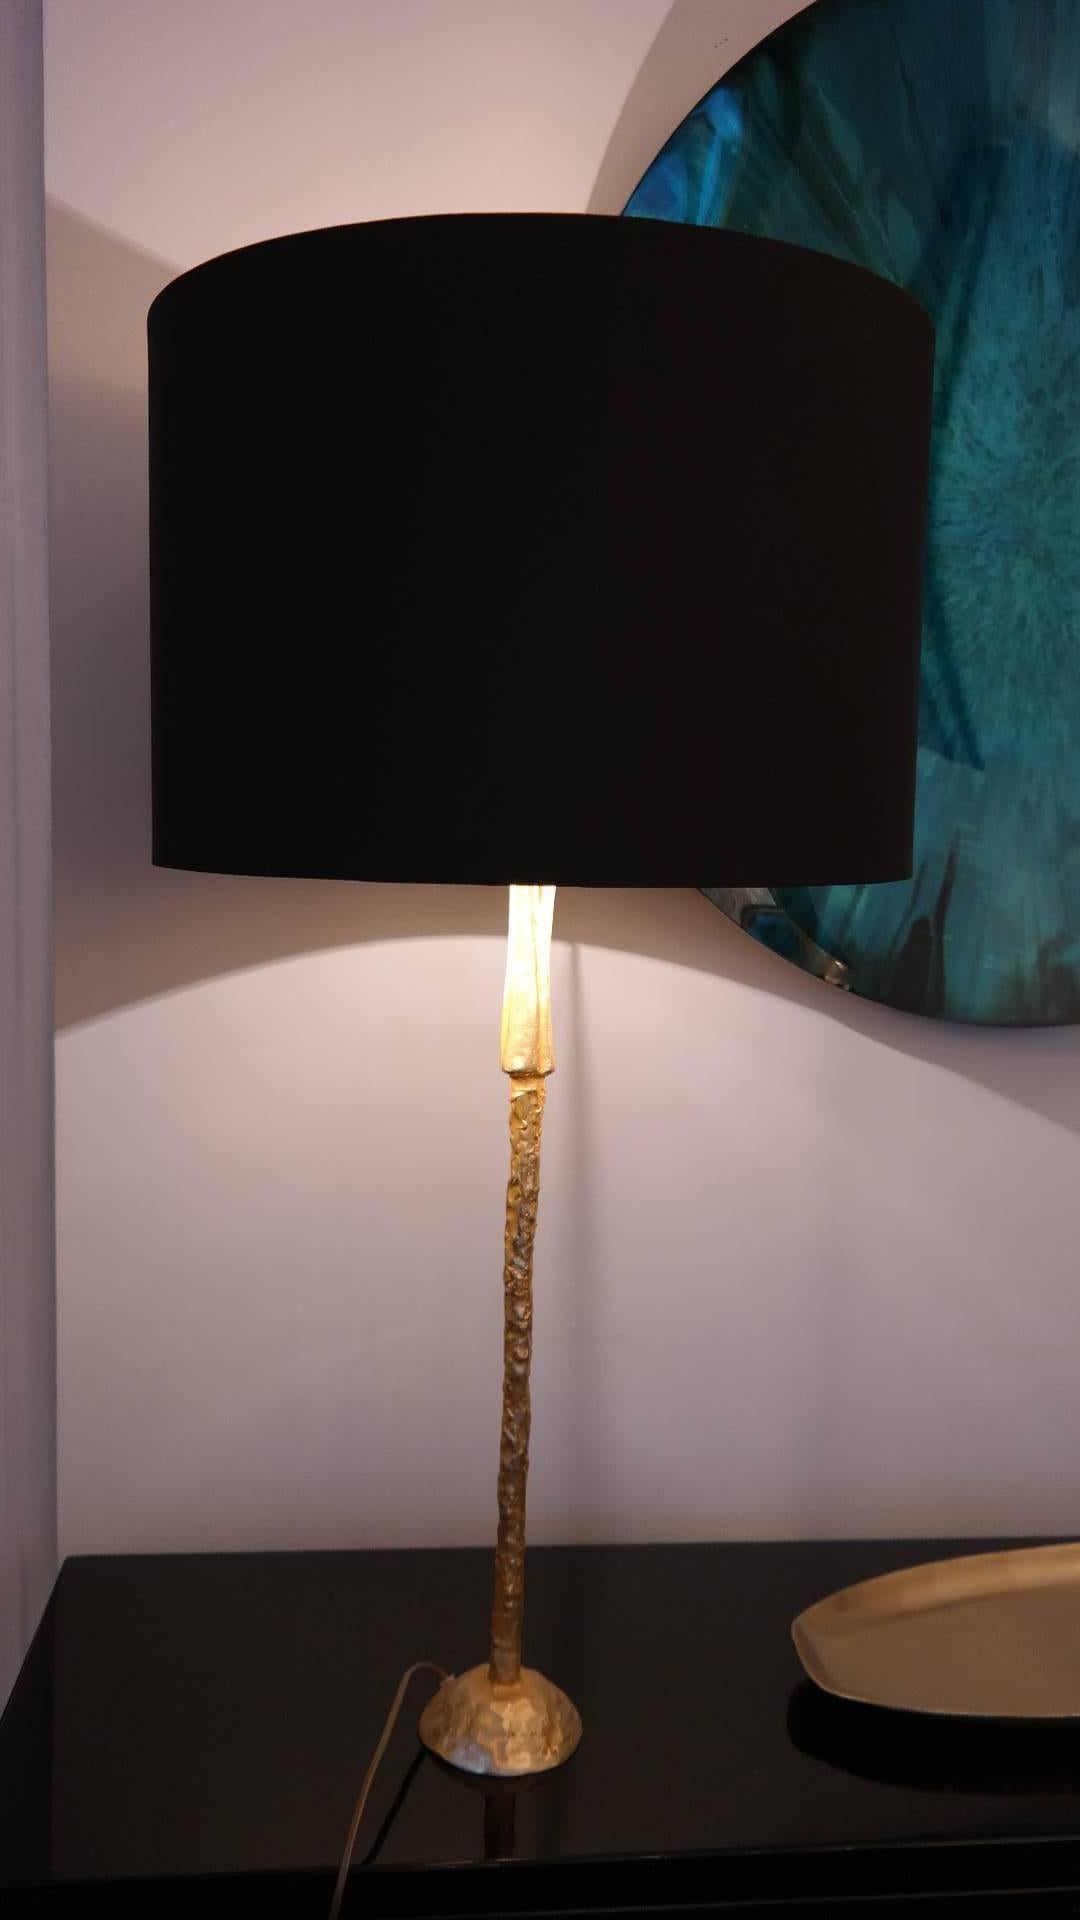 Elegant table lamp by Pierre Cesenove, France circa 1990, gilded bronze, new black silk shade inside gold, signature at the base.
Measures: Height 90 cm, diameter shade 48 cm, height shade 32 cm, height lamp without shade 64, diameter base 12